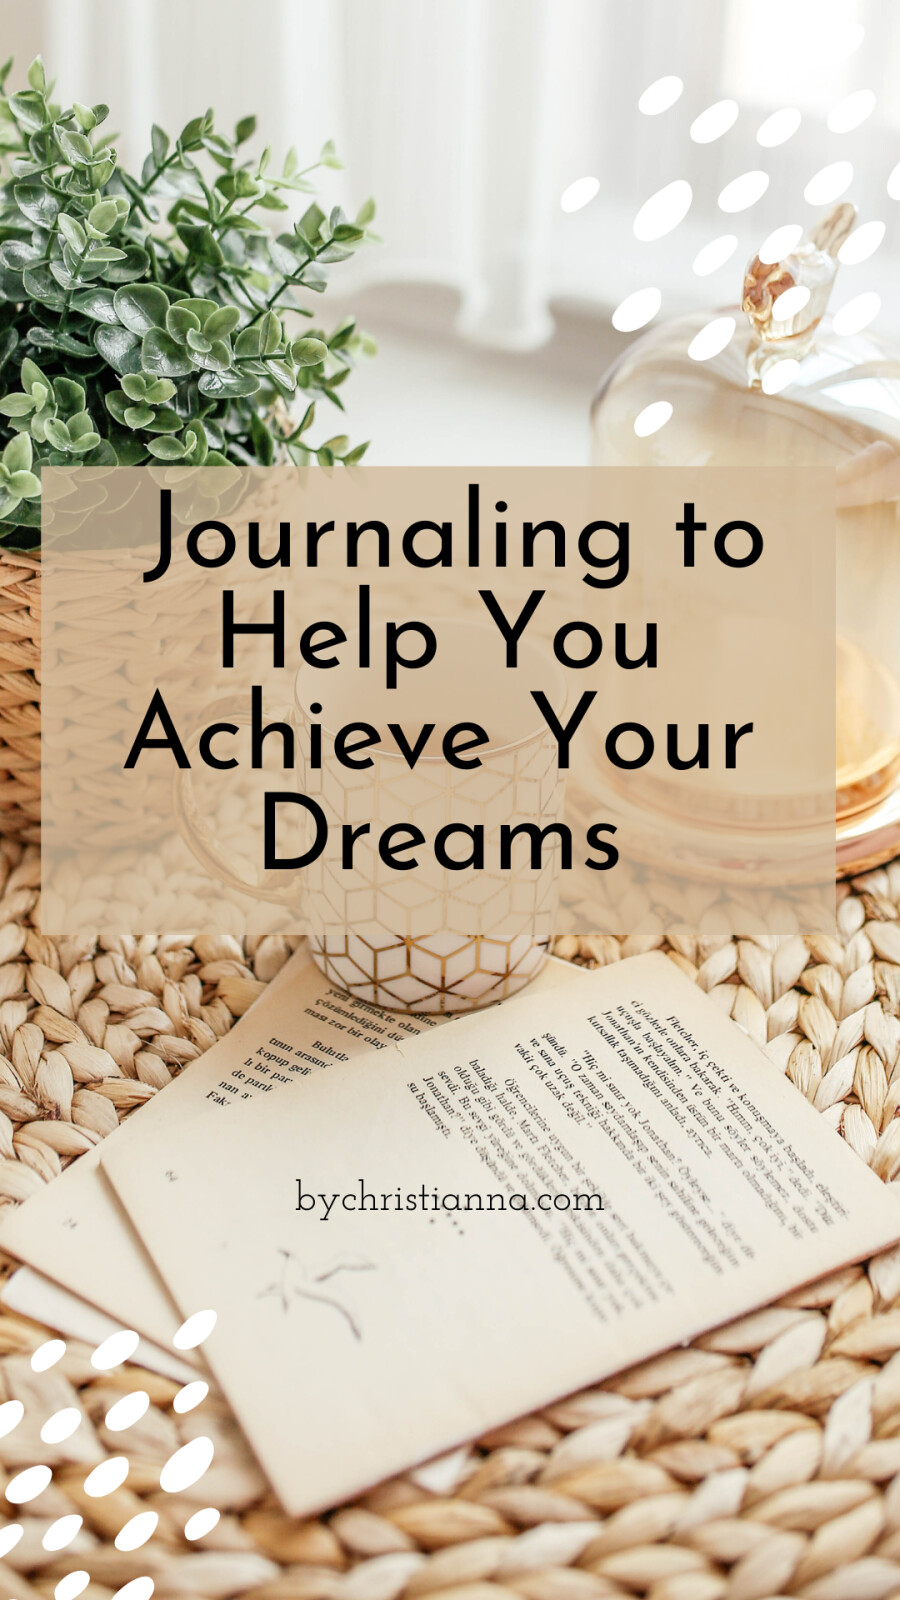 Journaling to Help You Achieve Your Dreams